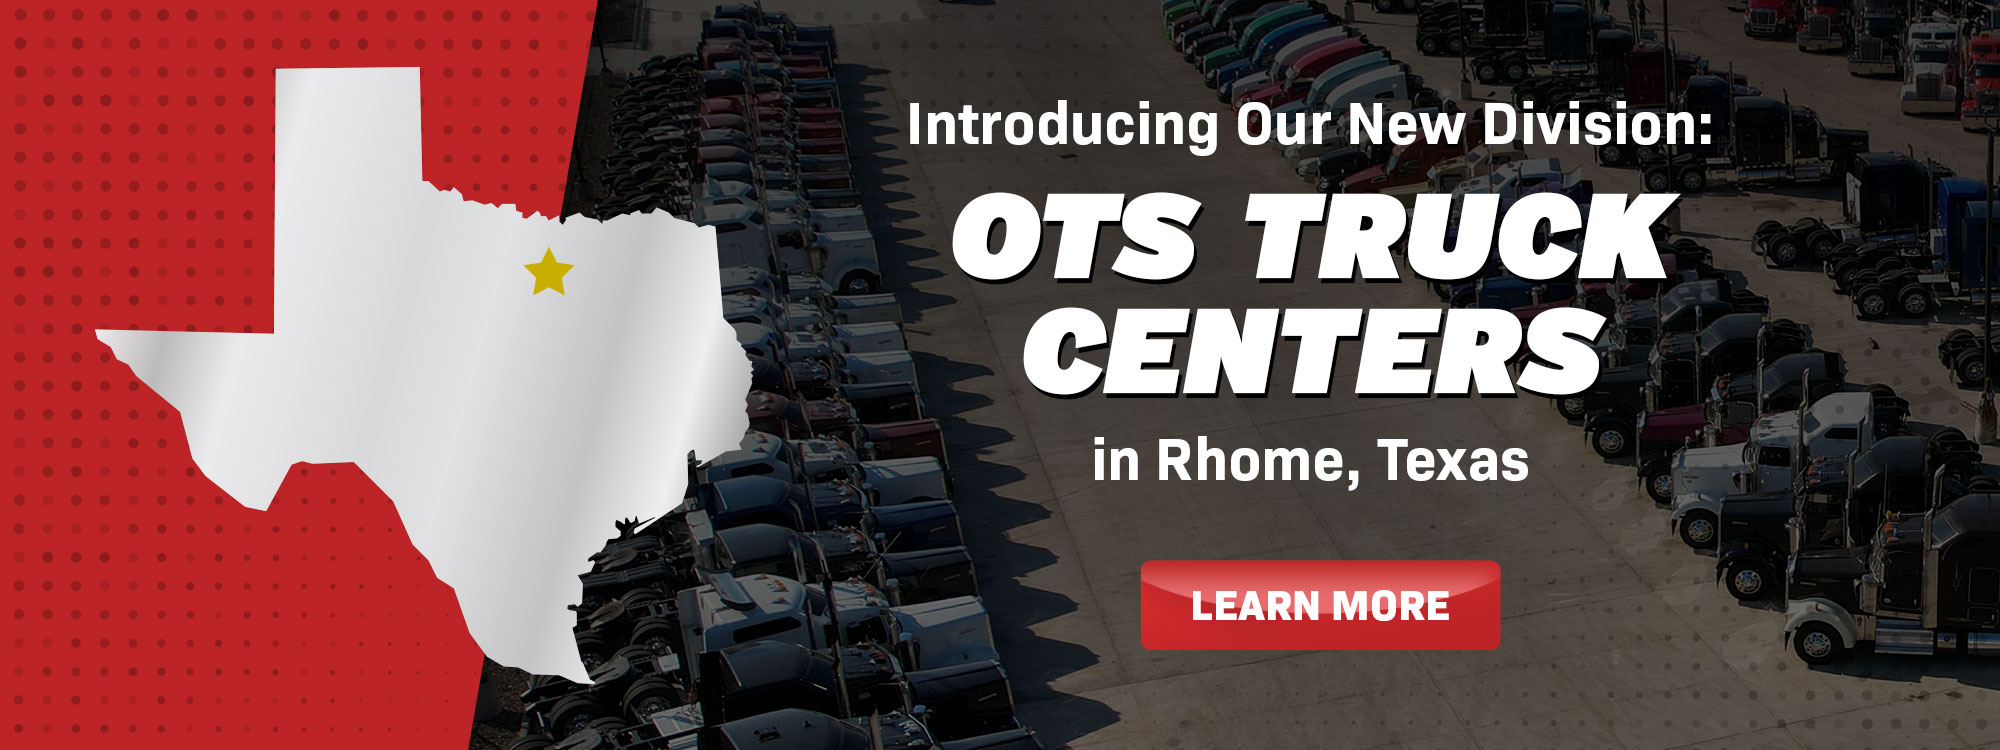 Introducing our New Division OTS Truck Centers in Rhome, Texas